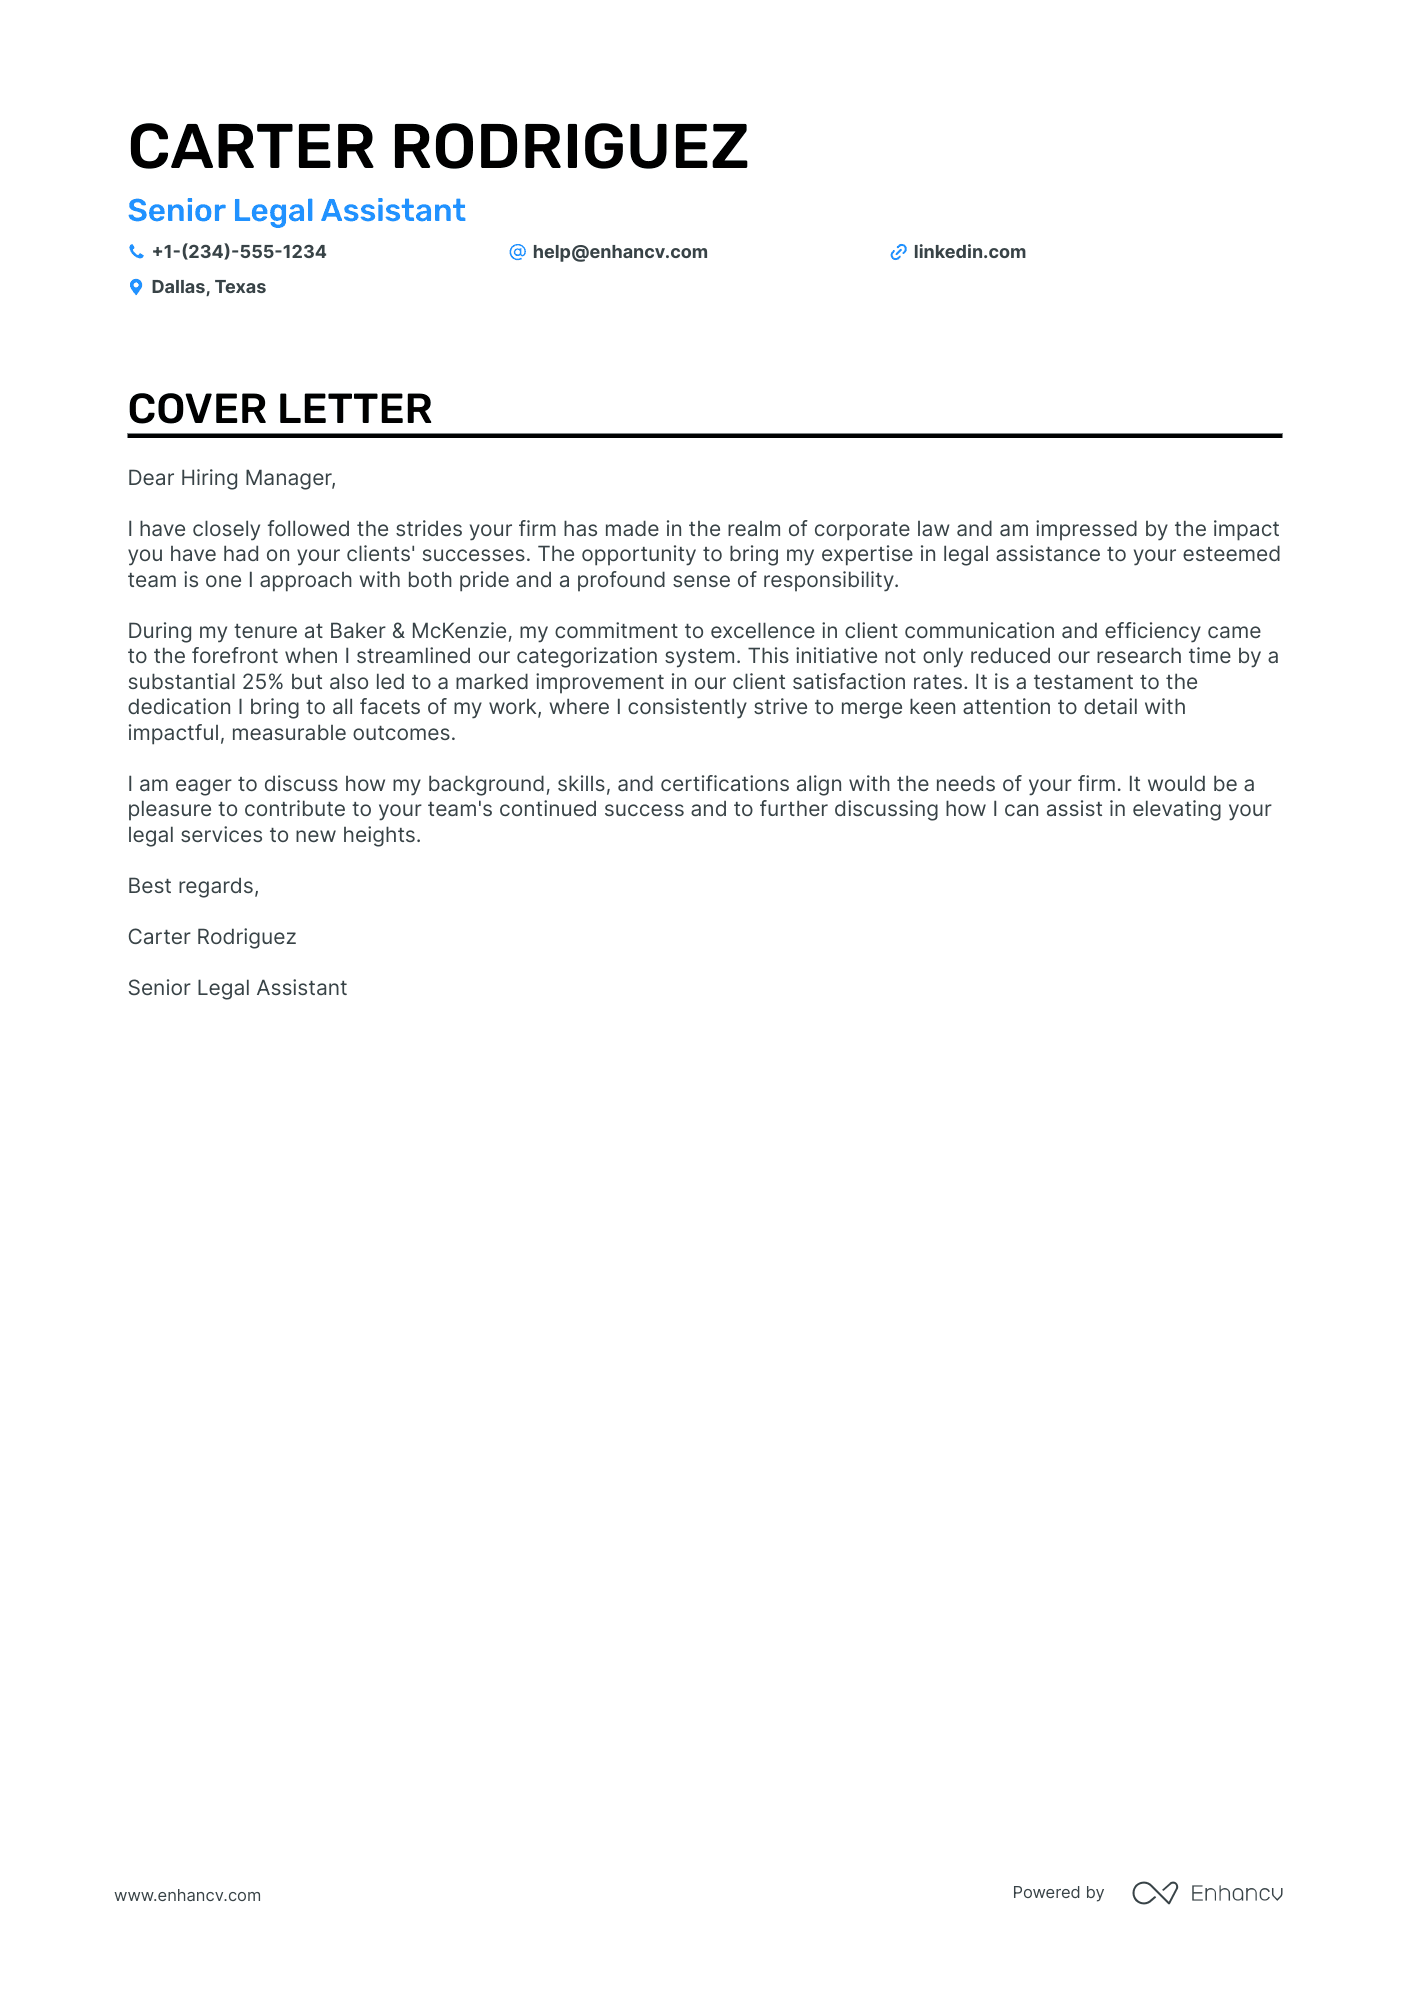 example cover letter for legal assistant position